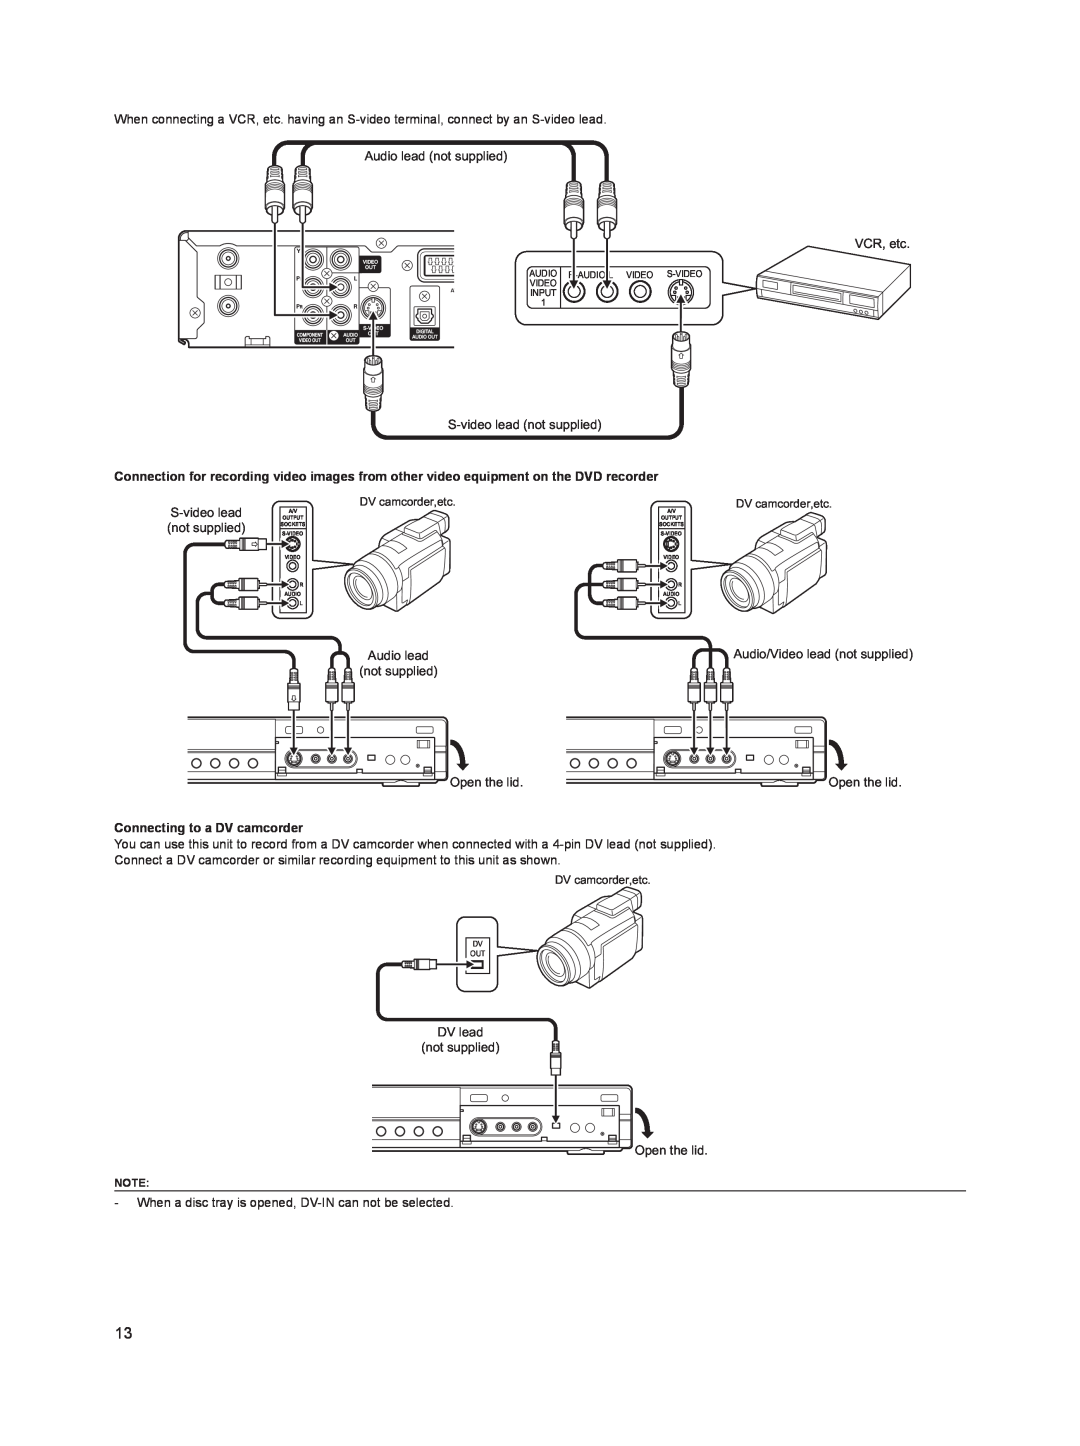 Sanyo DVR-HT120 instruction manual Connecting to a DV camcorder 